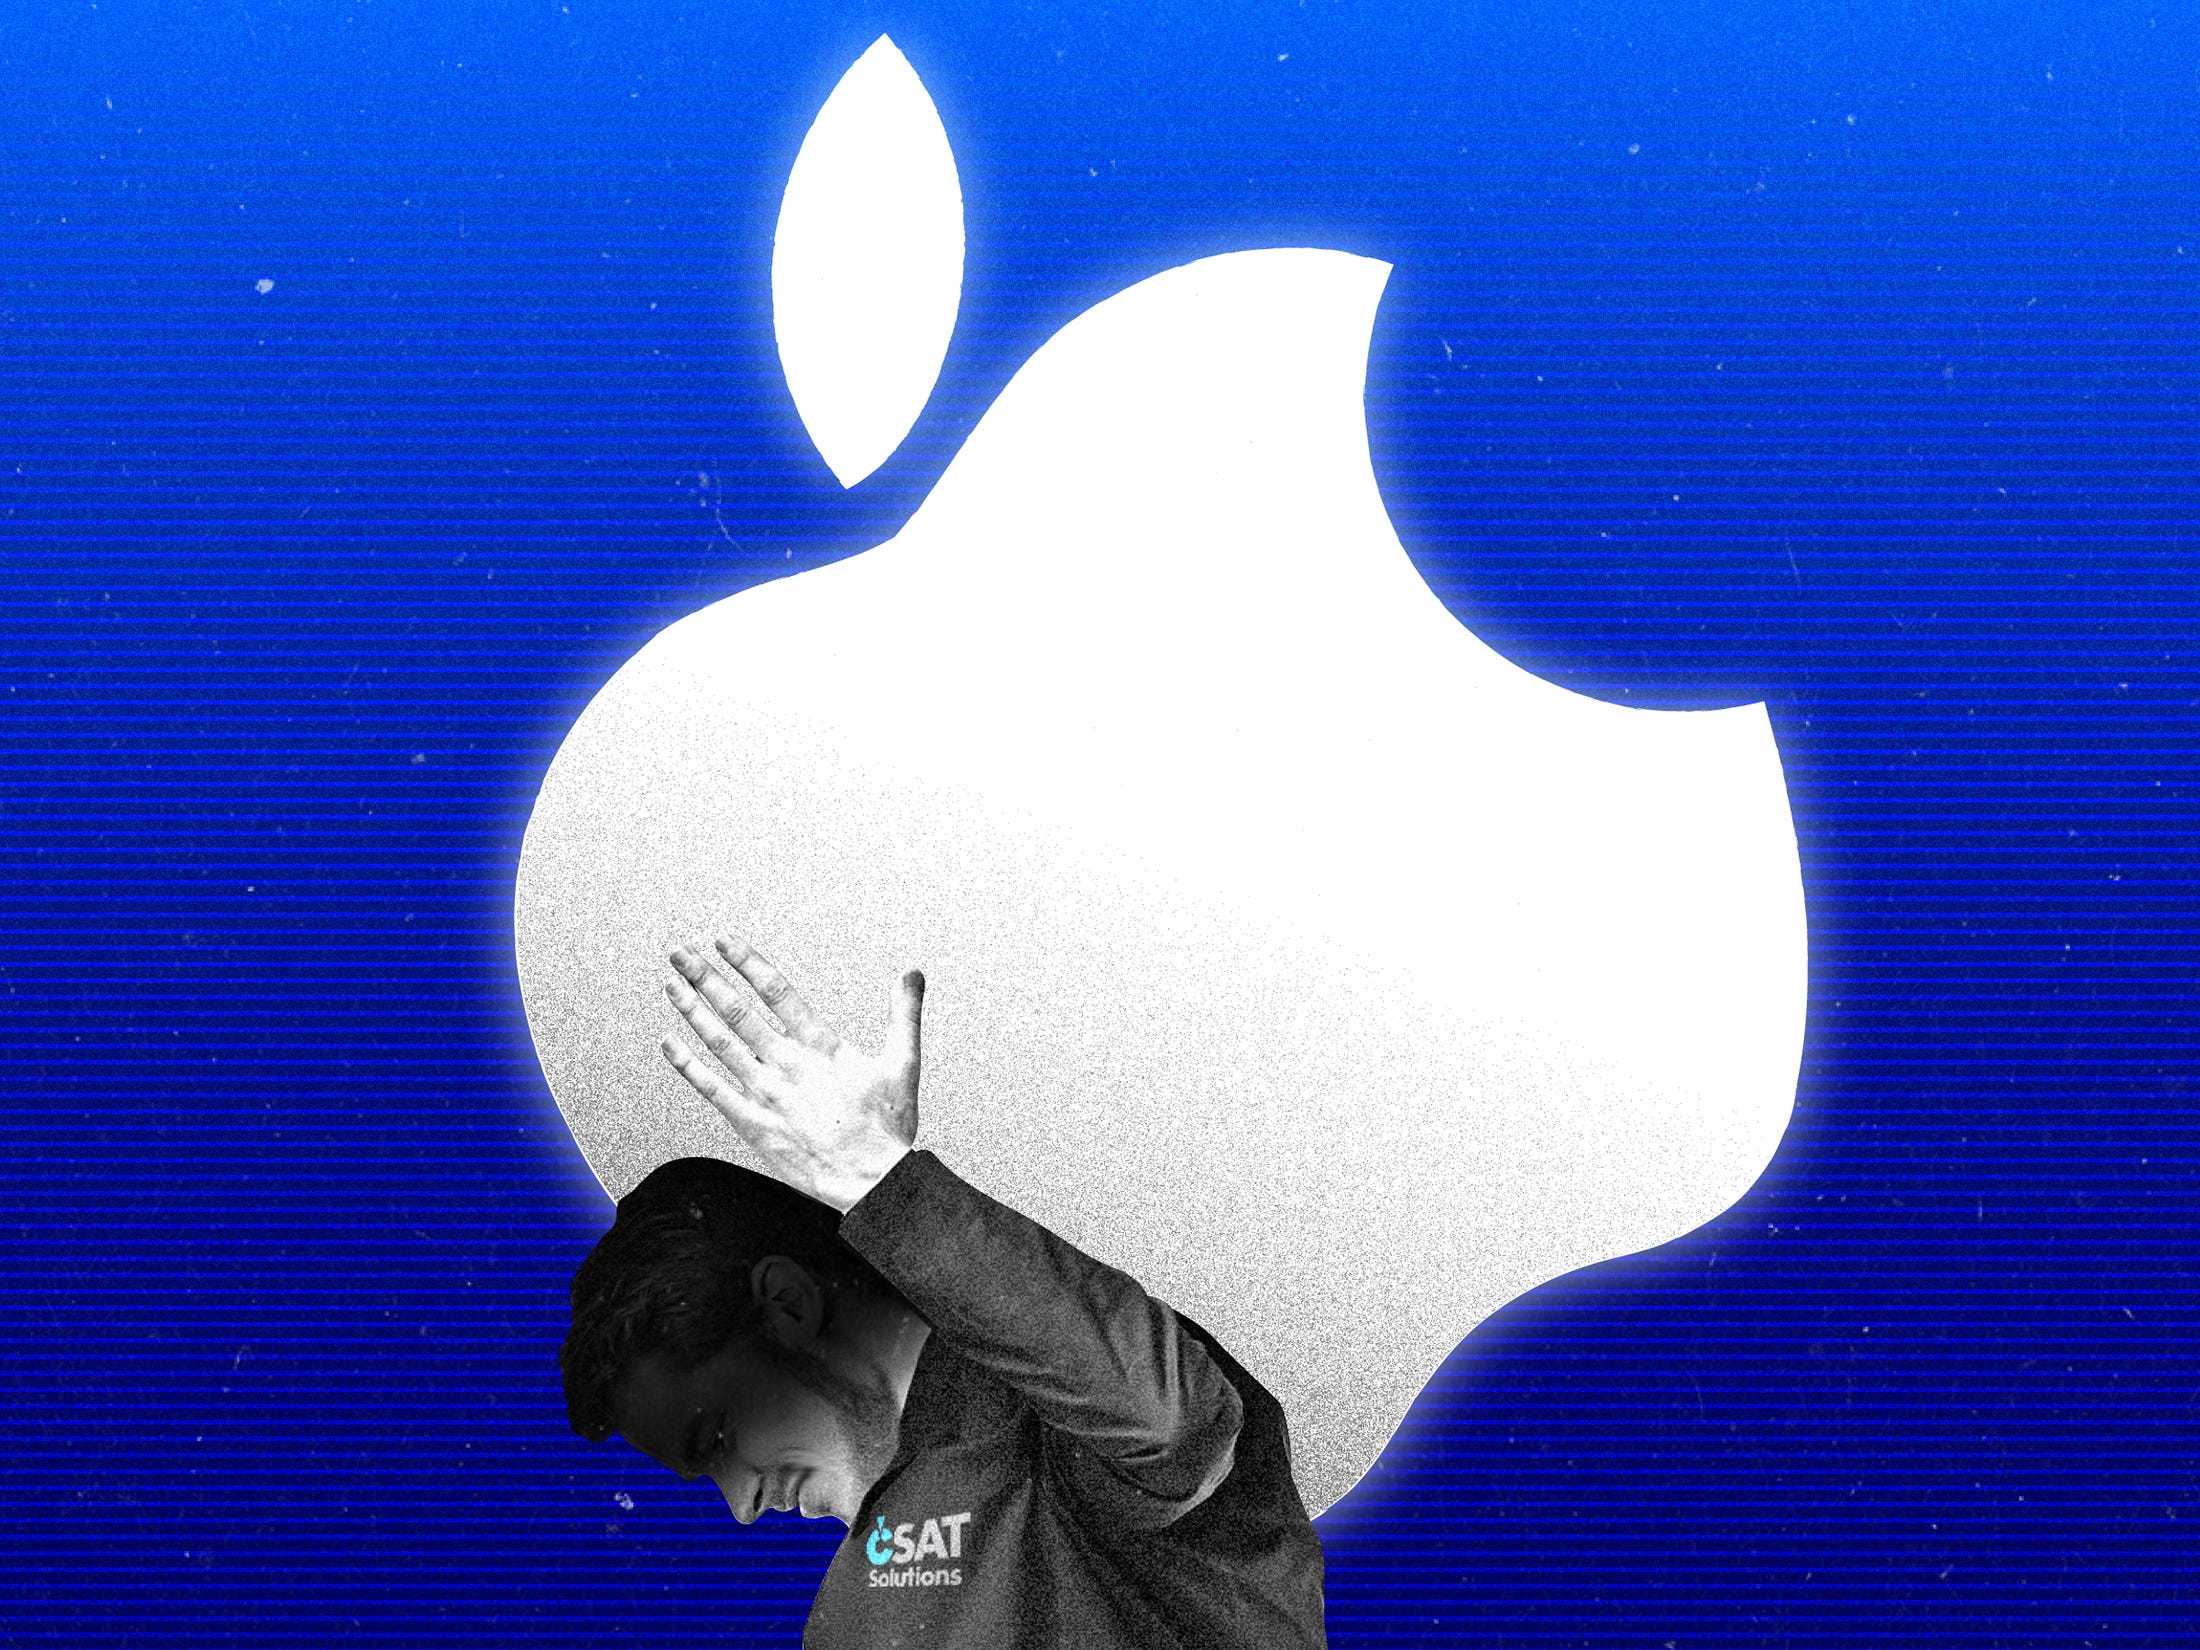 CSAT Solutions employee carrying a large Apple logo on their back on a light to dark blue gradient background